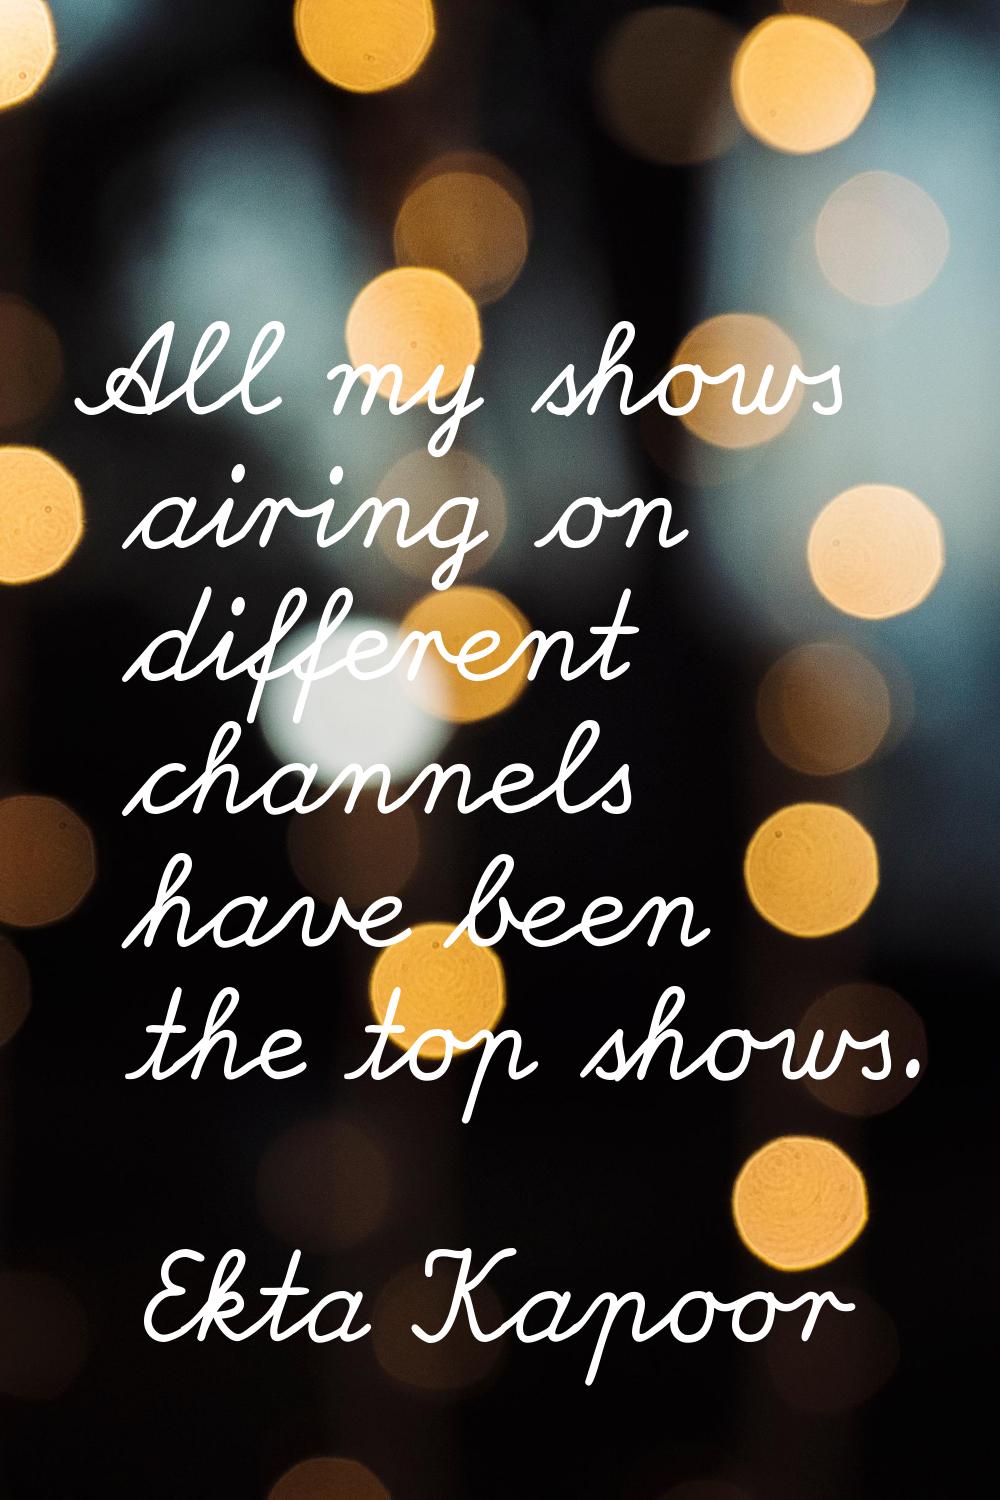 All my shows airing on different channels have been the top shows.